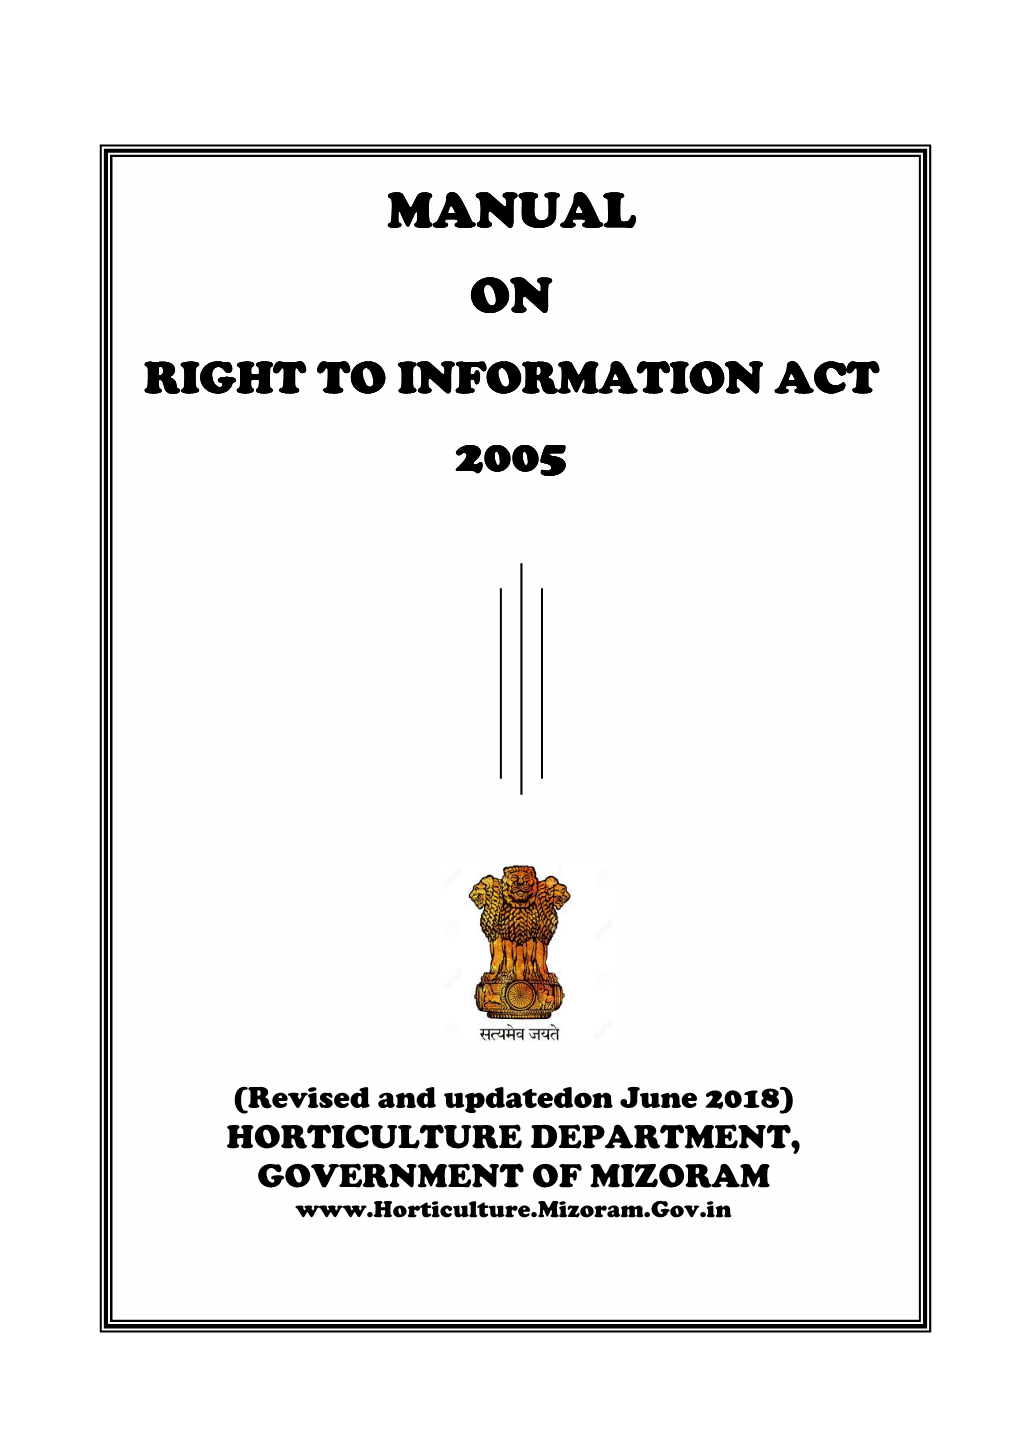 Manual on Right to Information Act 2005